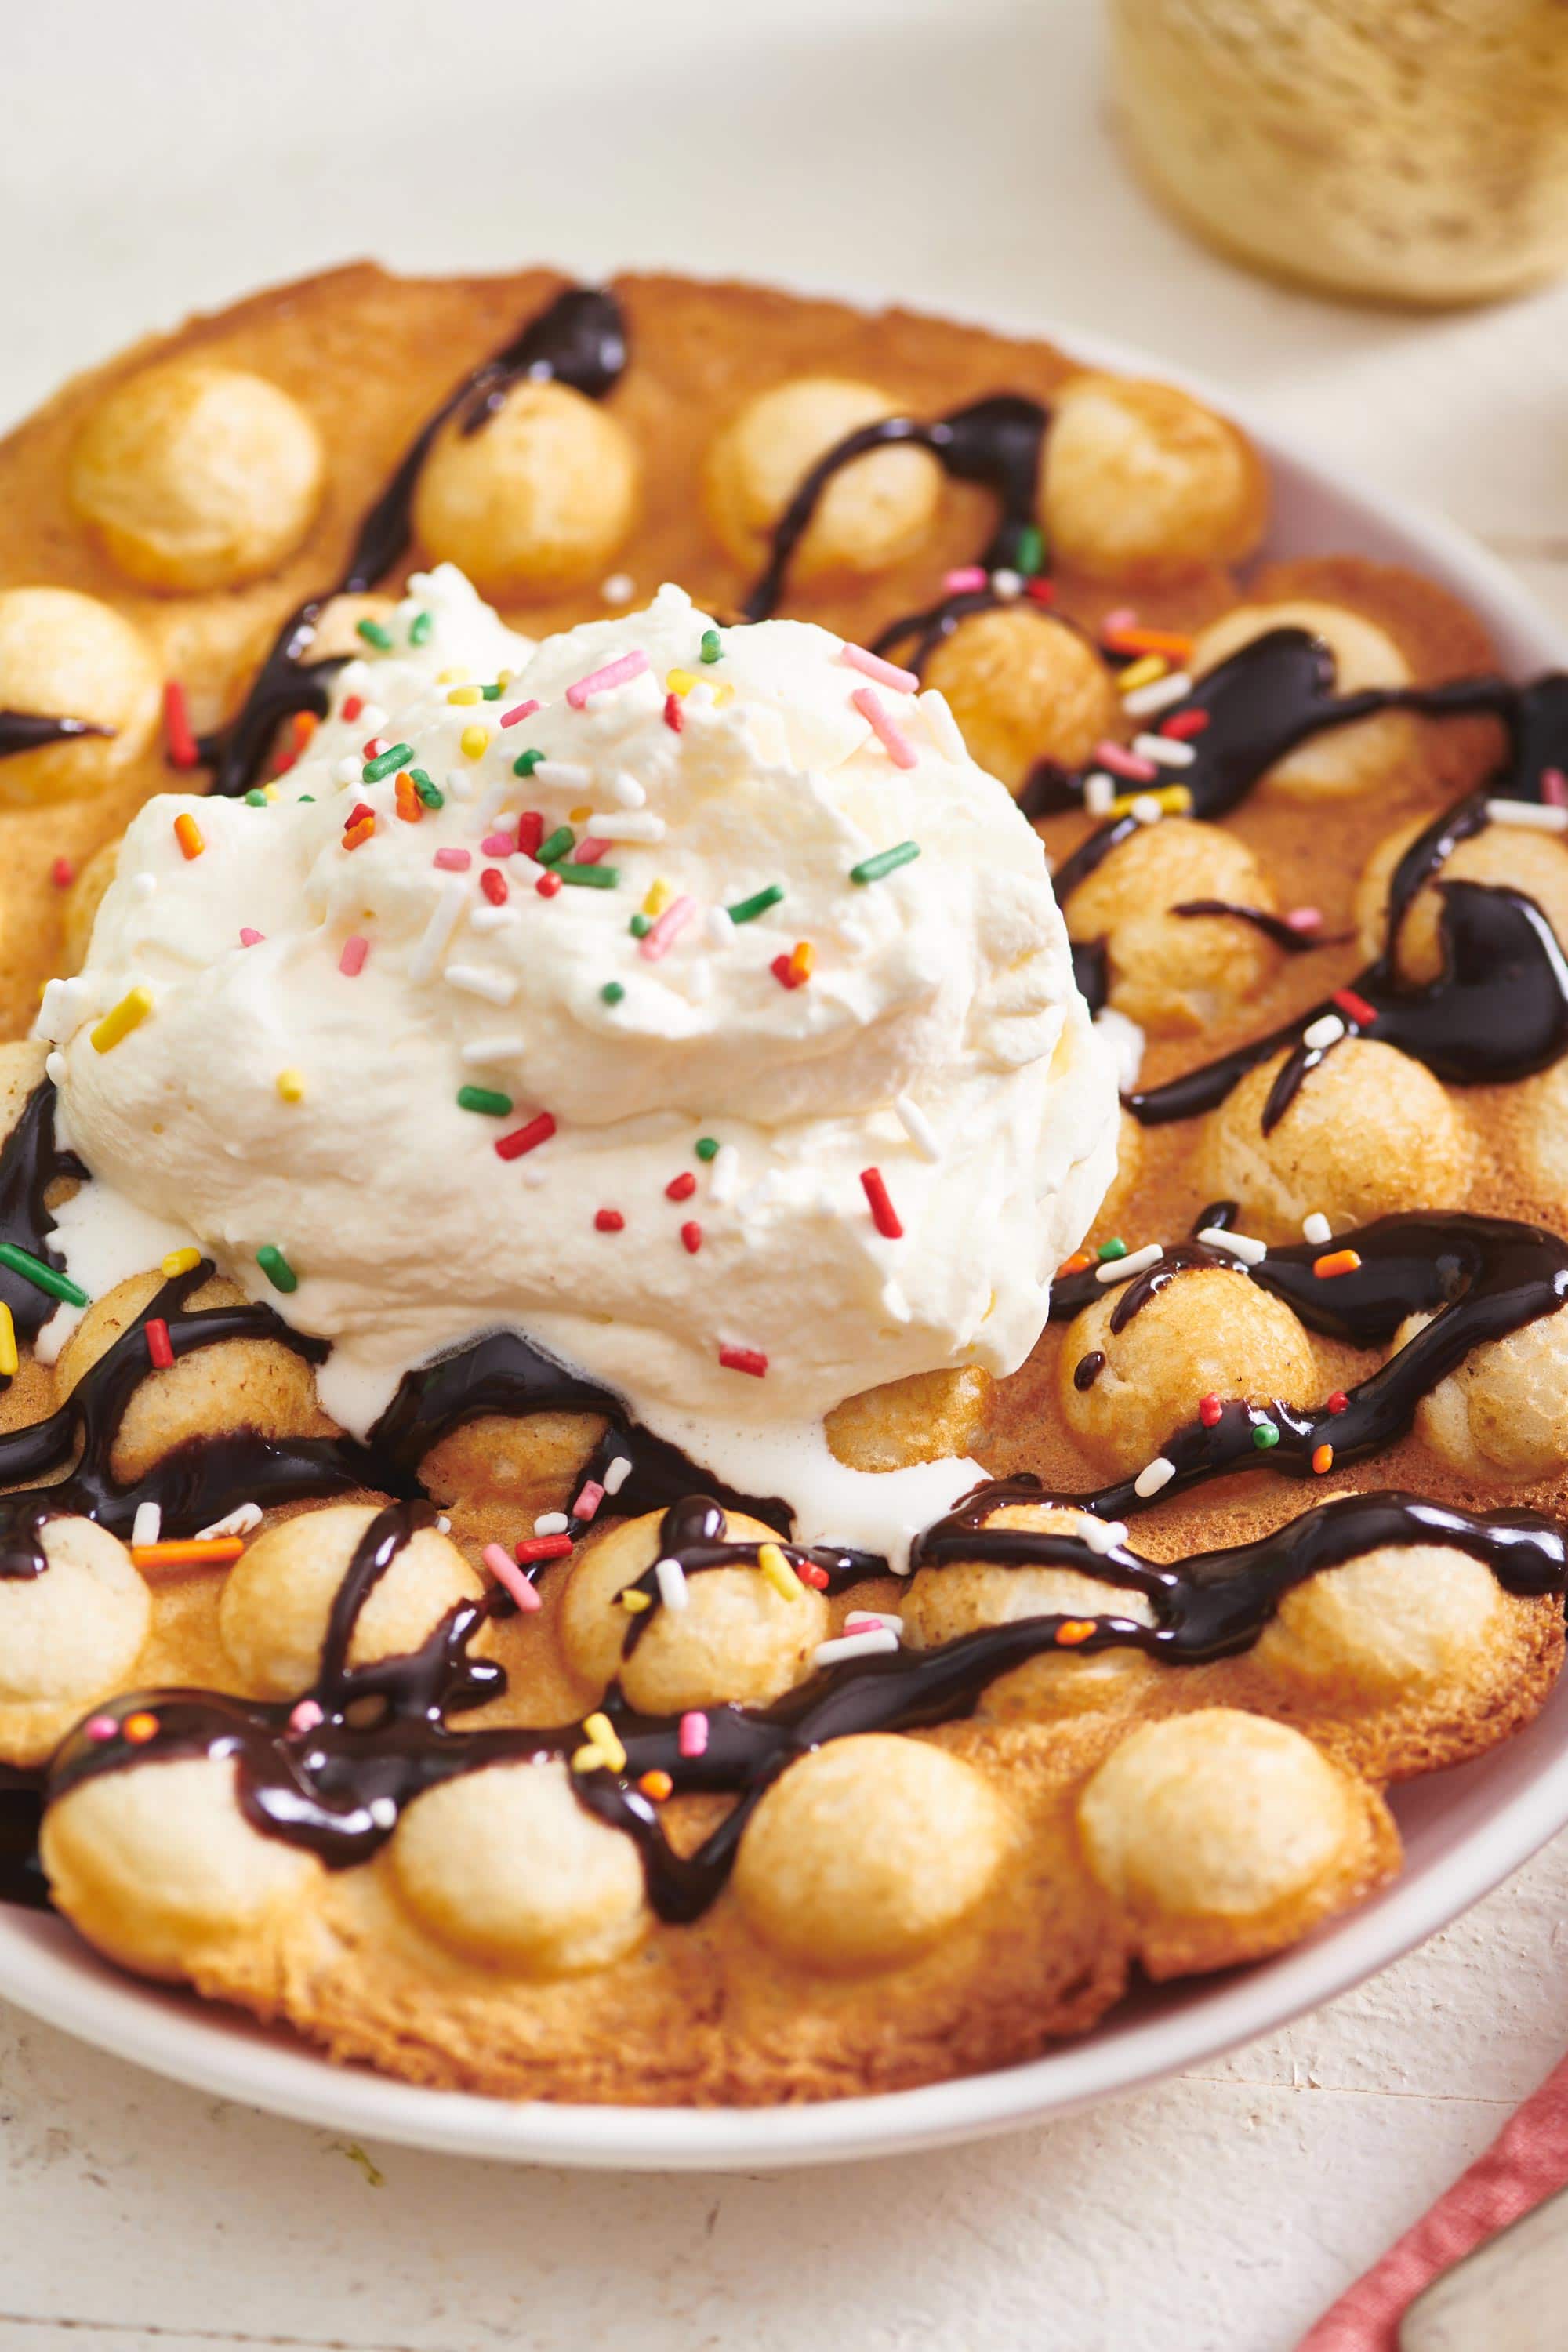 Bubble Waffles with chocolate sauce and ice cream with sprinkles.